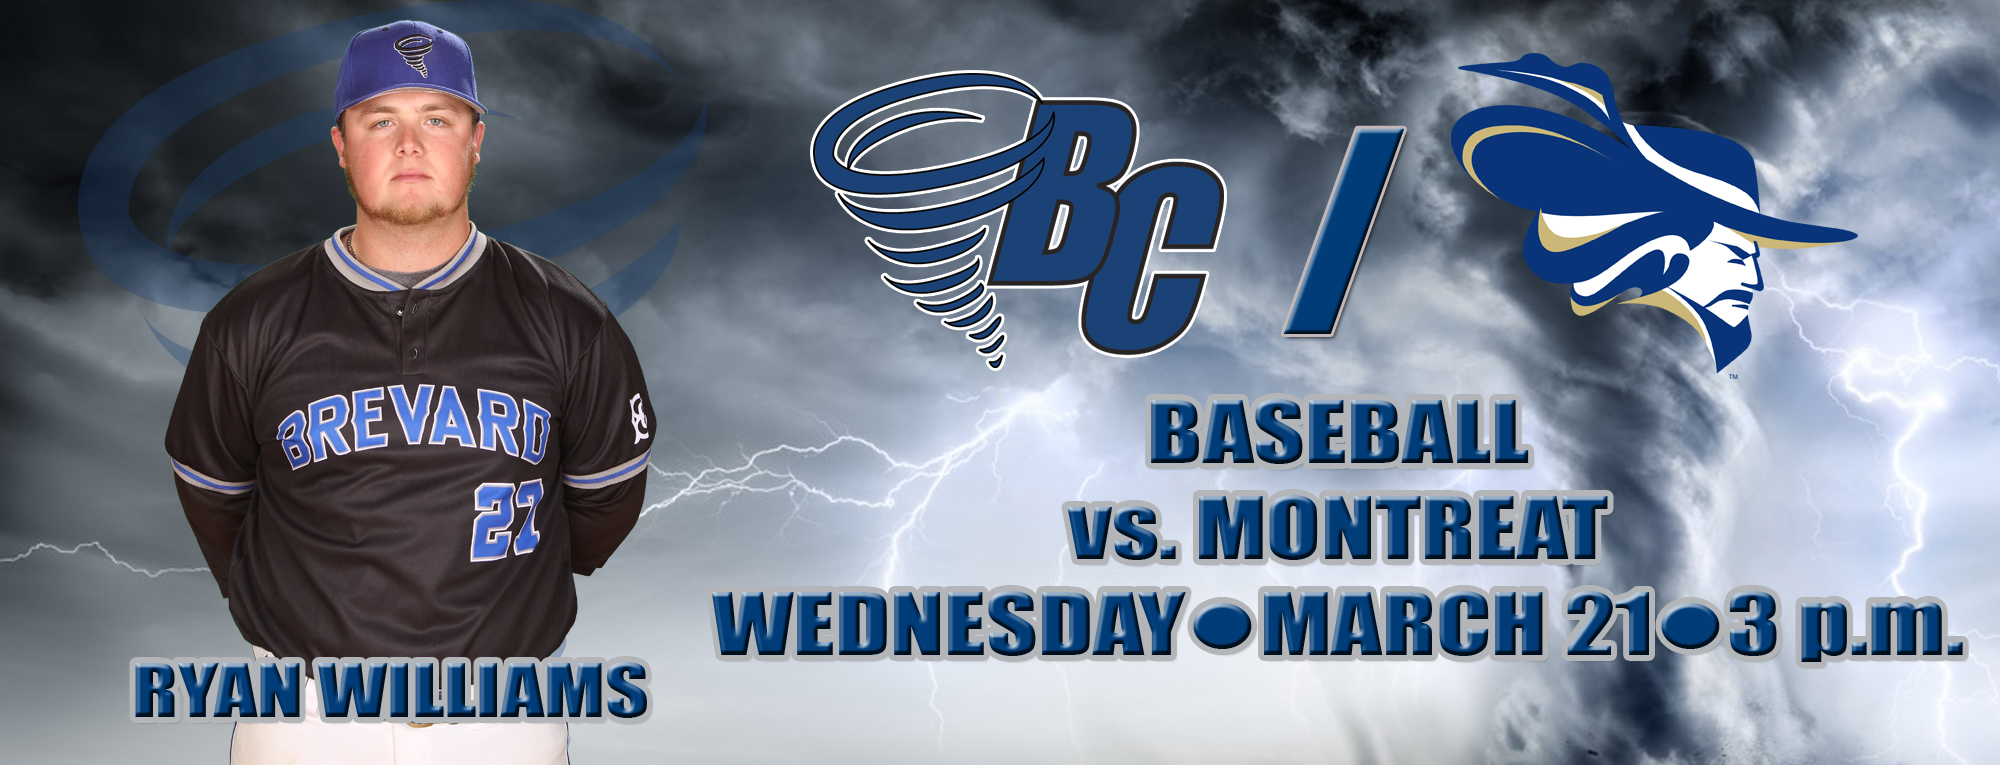 Tornados Look to Carry Momentum Against Montreat